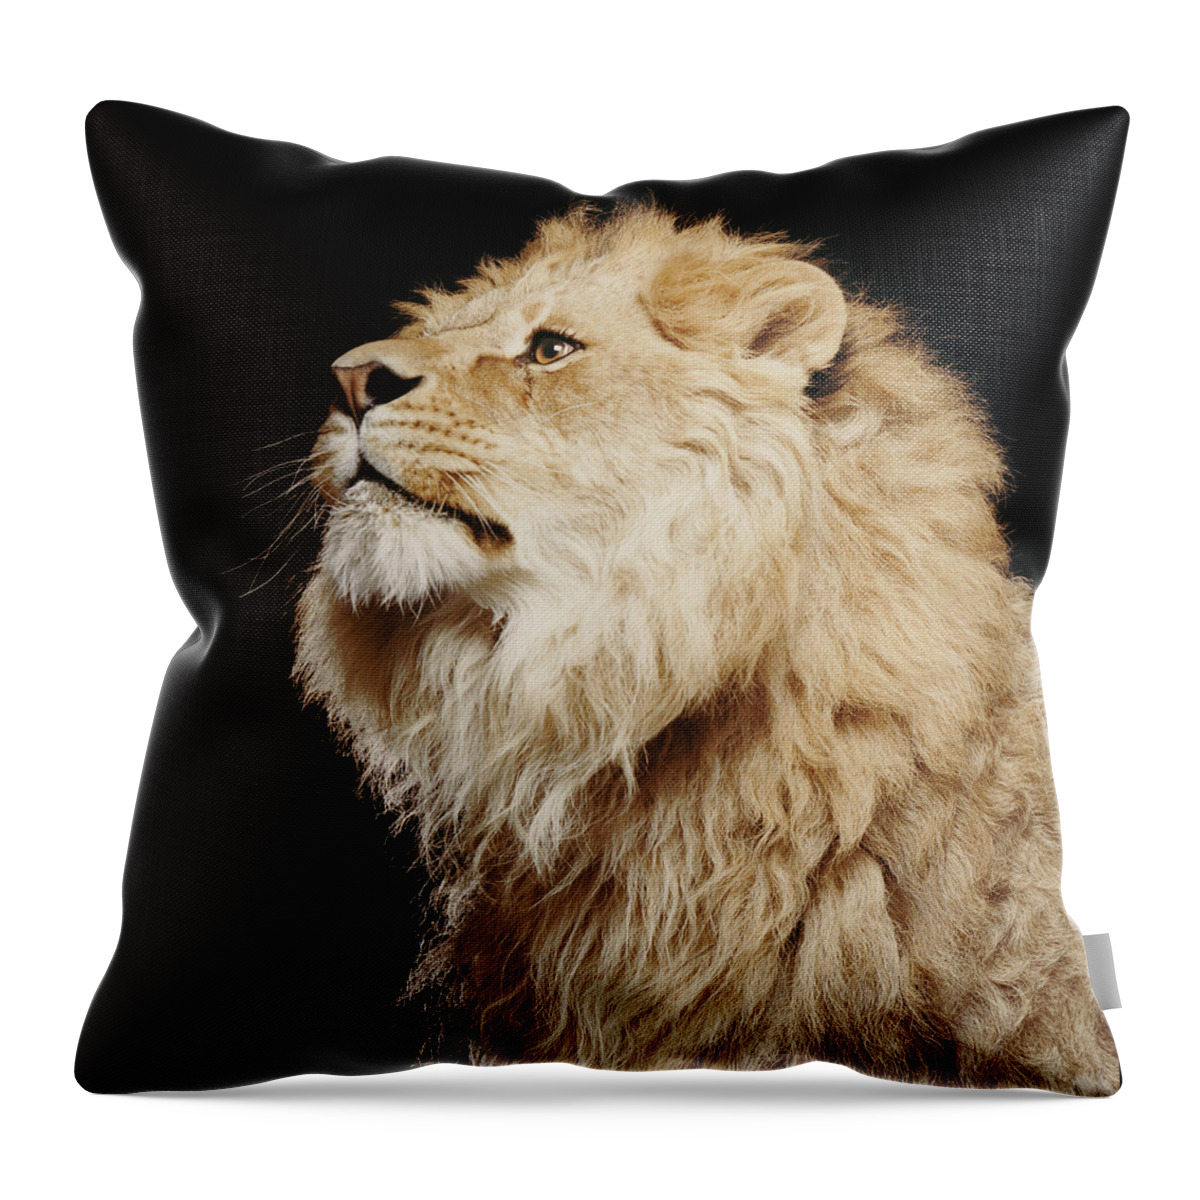 Male Animal Throw Pillow featuring the photograph Lion Profile #1 by Gk Hart/vicky Hart